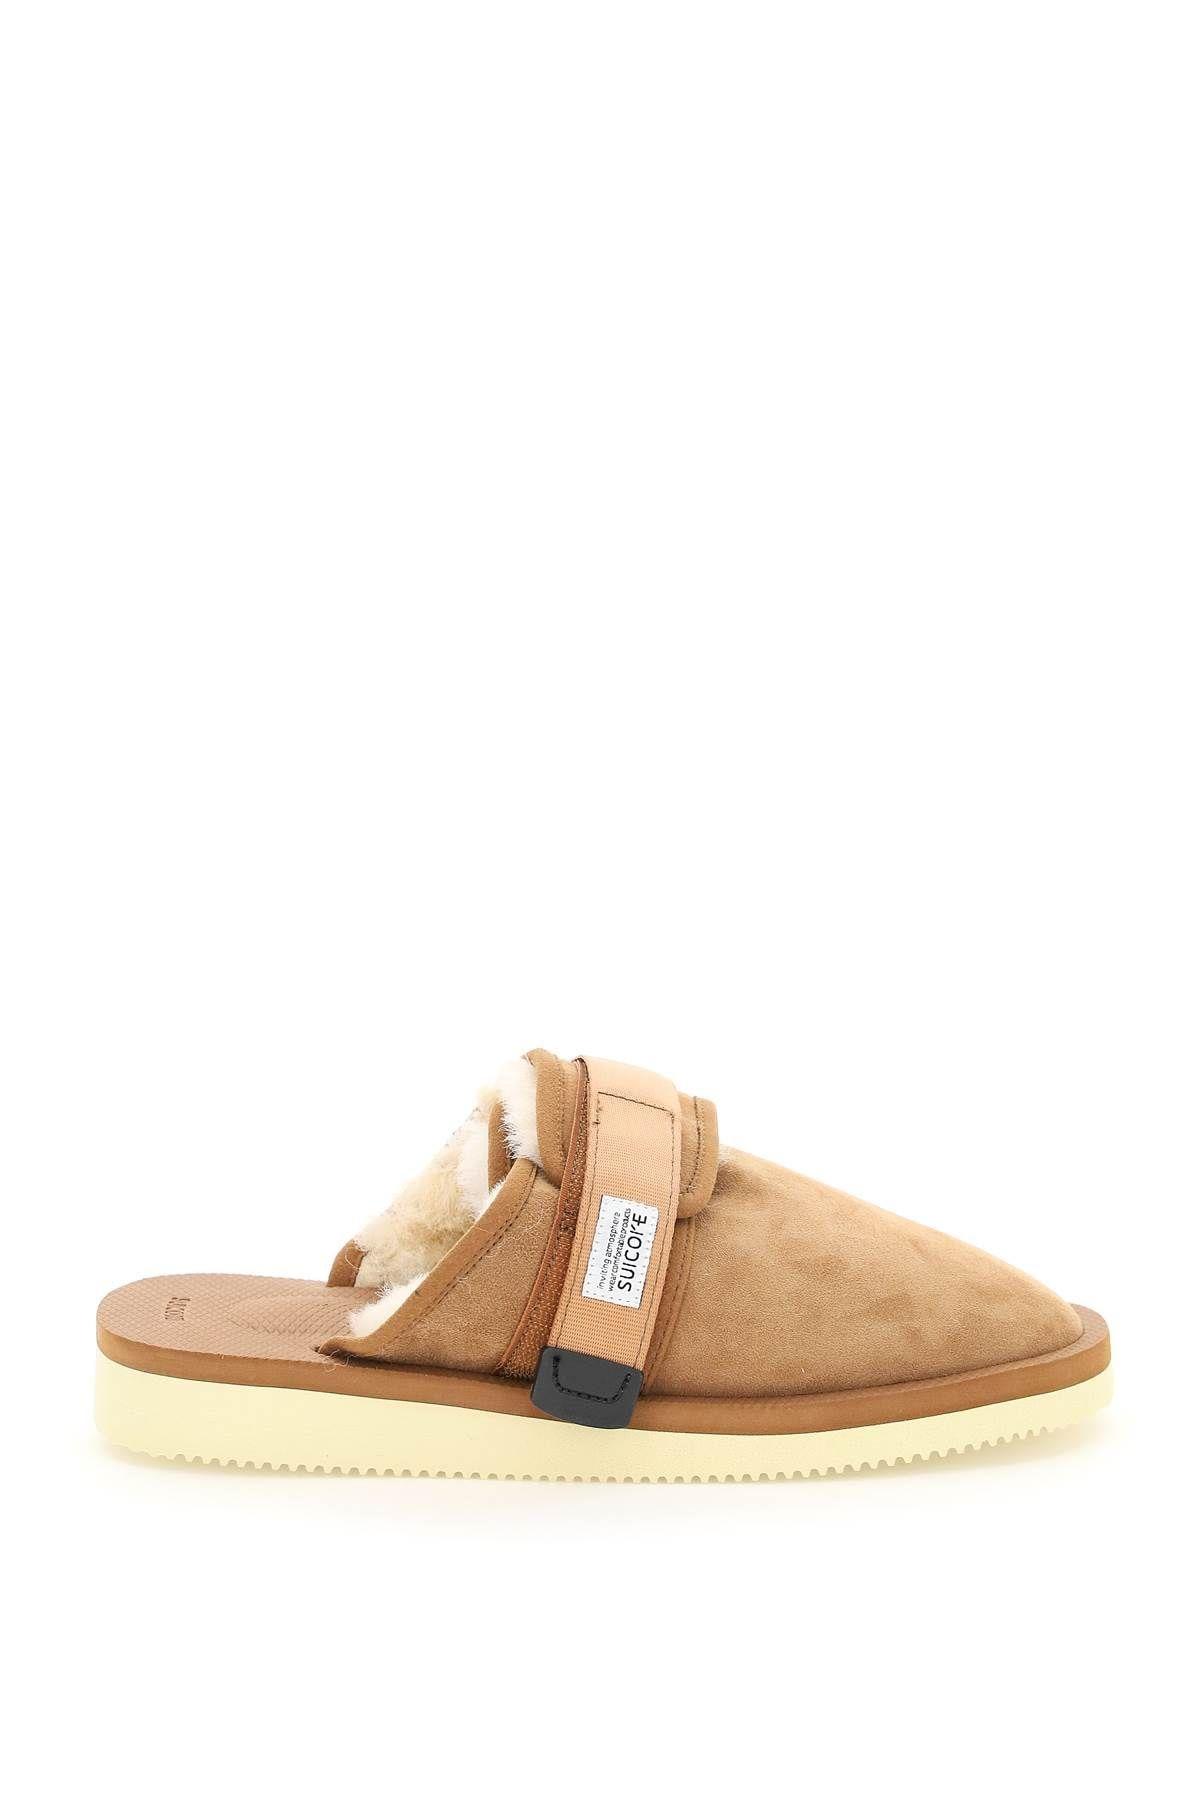 SUICOKE zavo Suede Sabot With Shearling